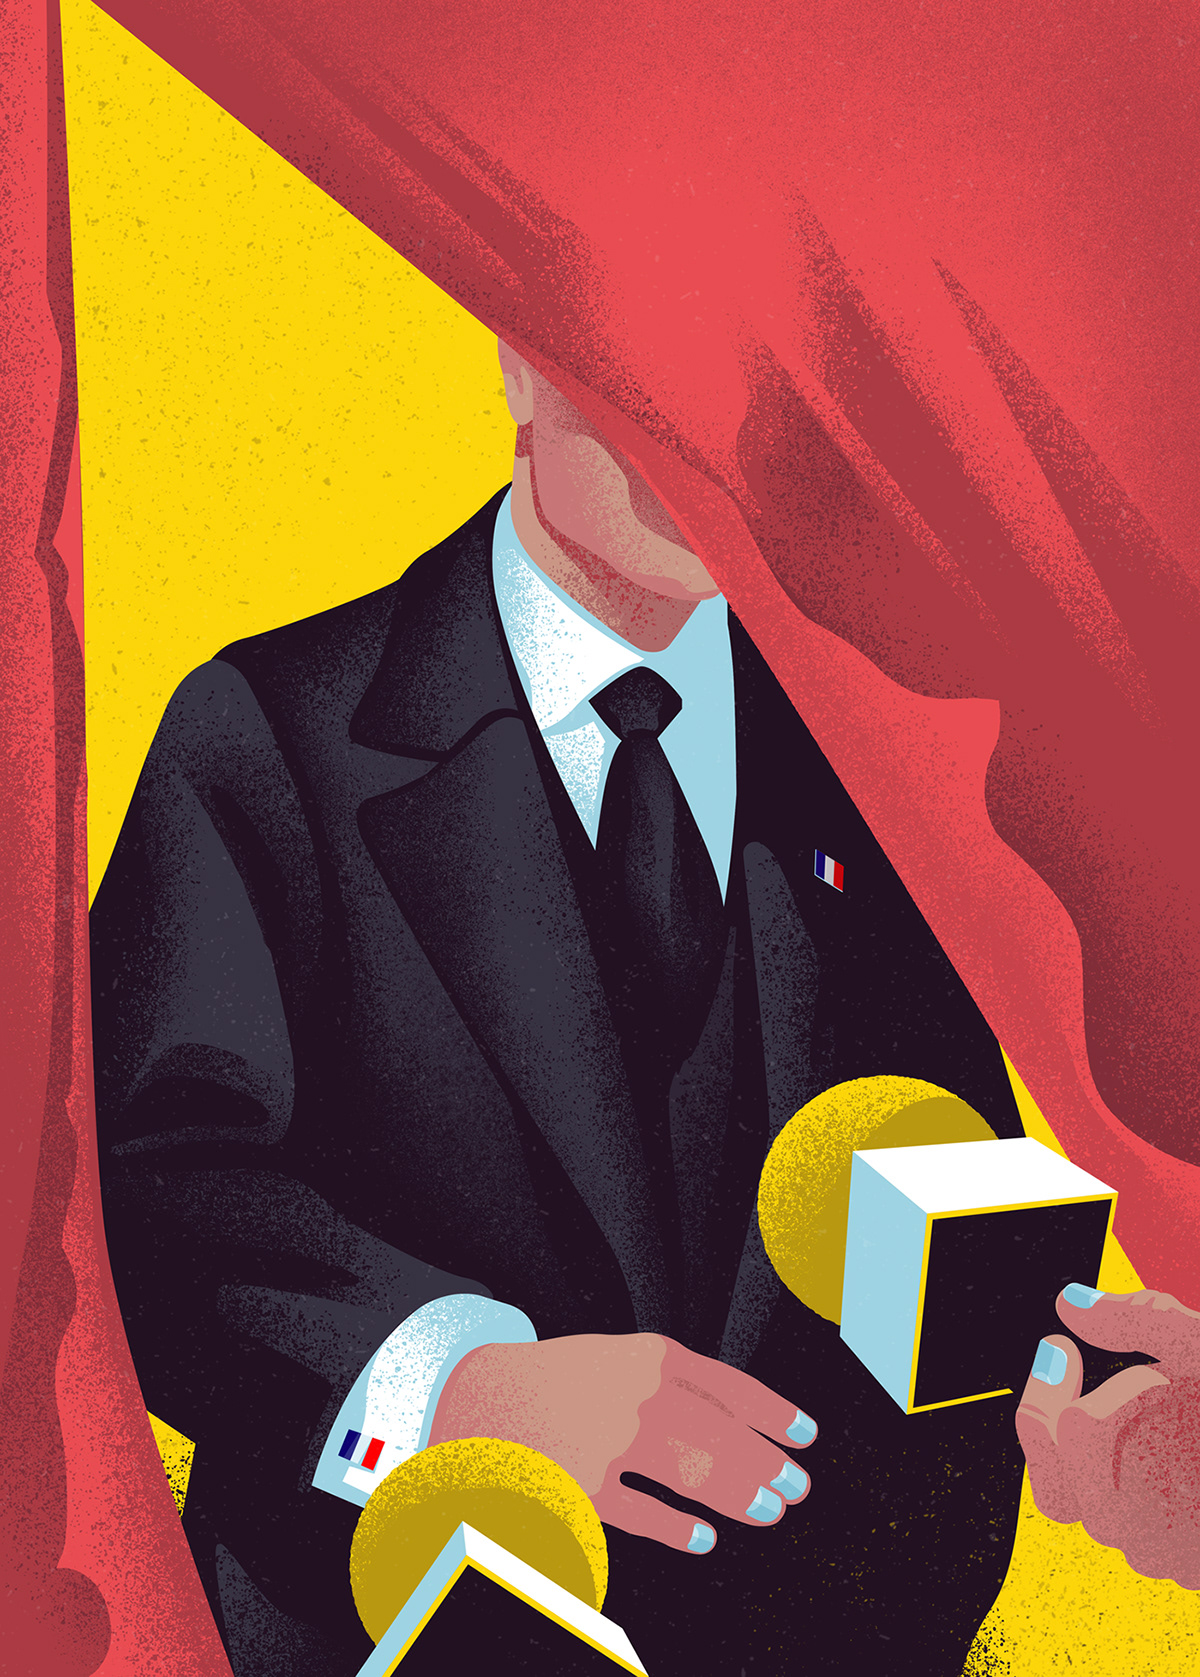 culture Editorial Illustration france magazine private life Public life science social society